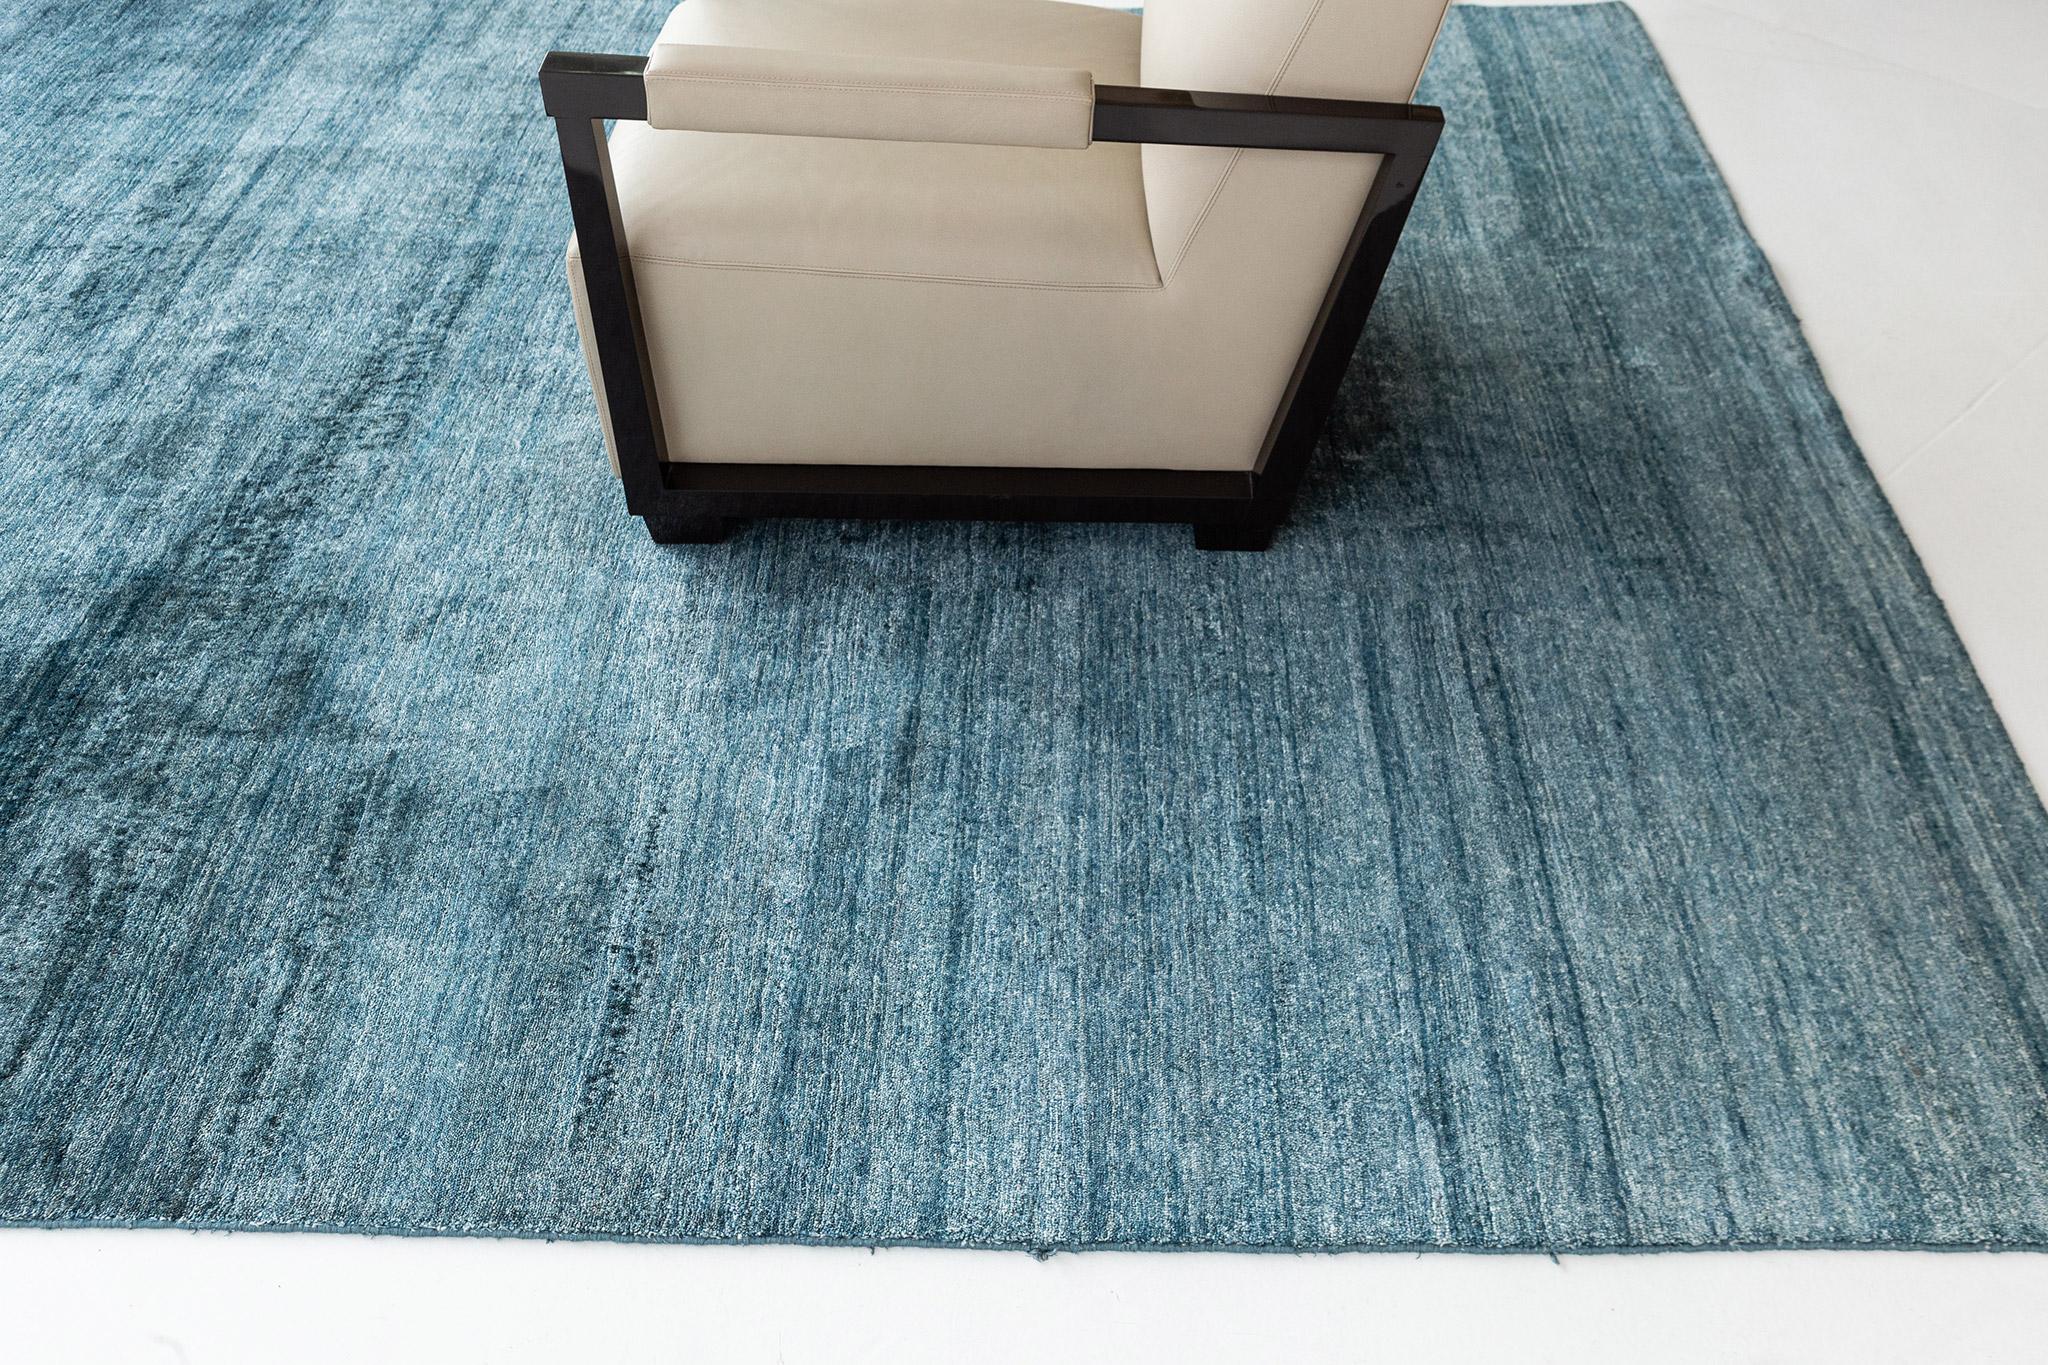 Dara' is a solid bamboo silk rug in the stunning vibrant blue green tones. Its simplicity does not take away from the rug's luxurious quality and beautiful sheen. Dara is a splendid rug for any design space.\

Rug Number
24591
Size
7' 11